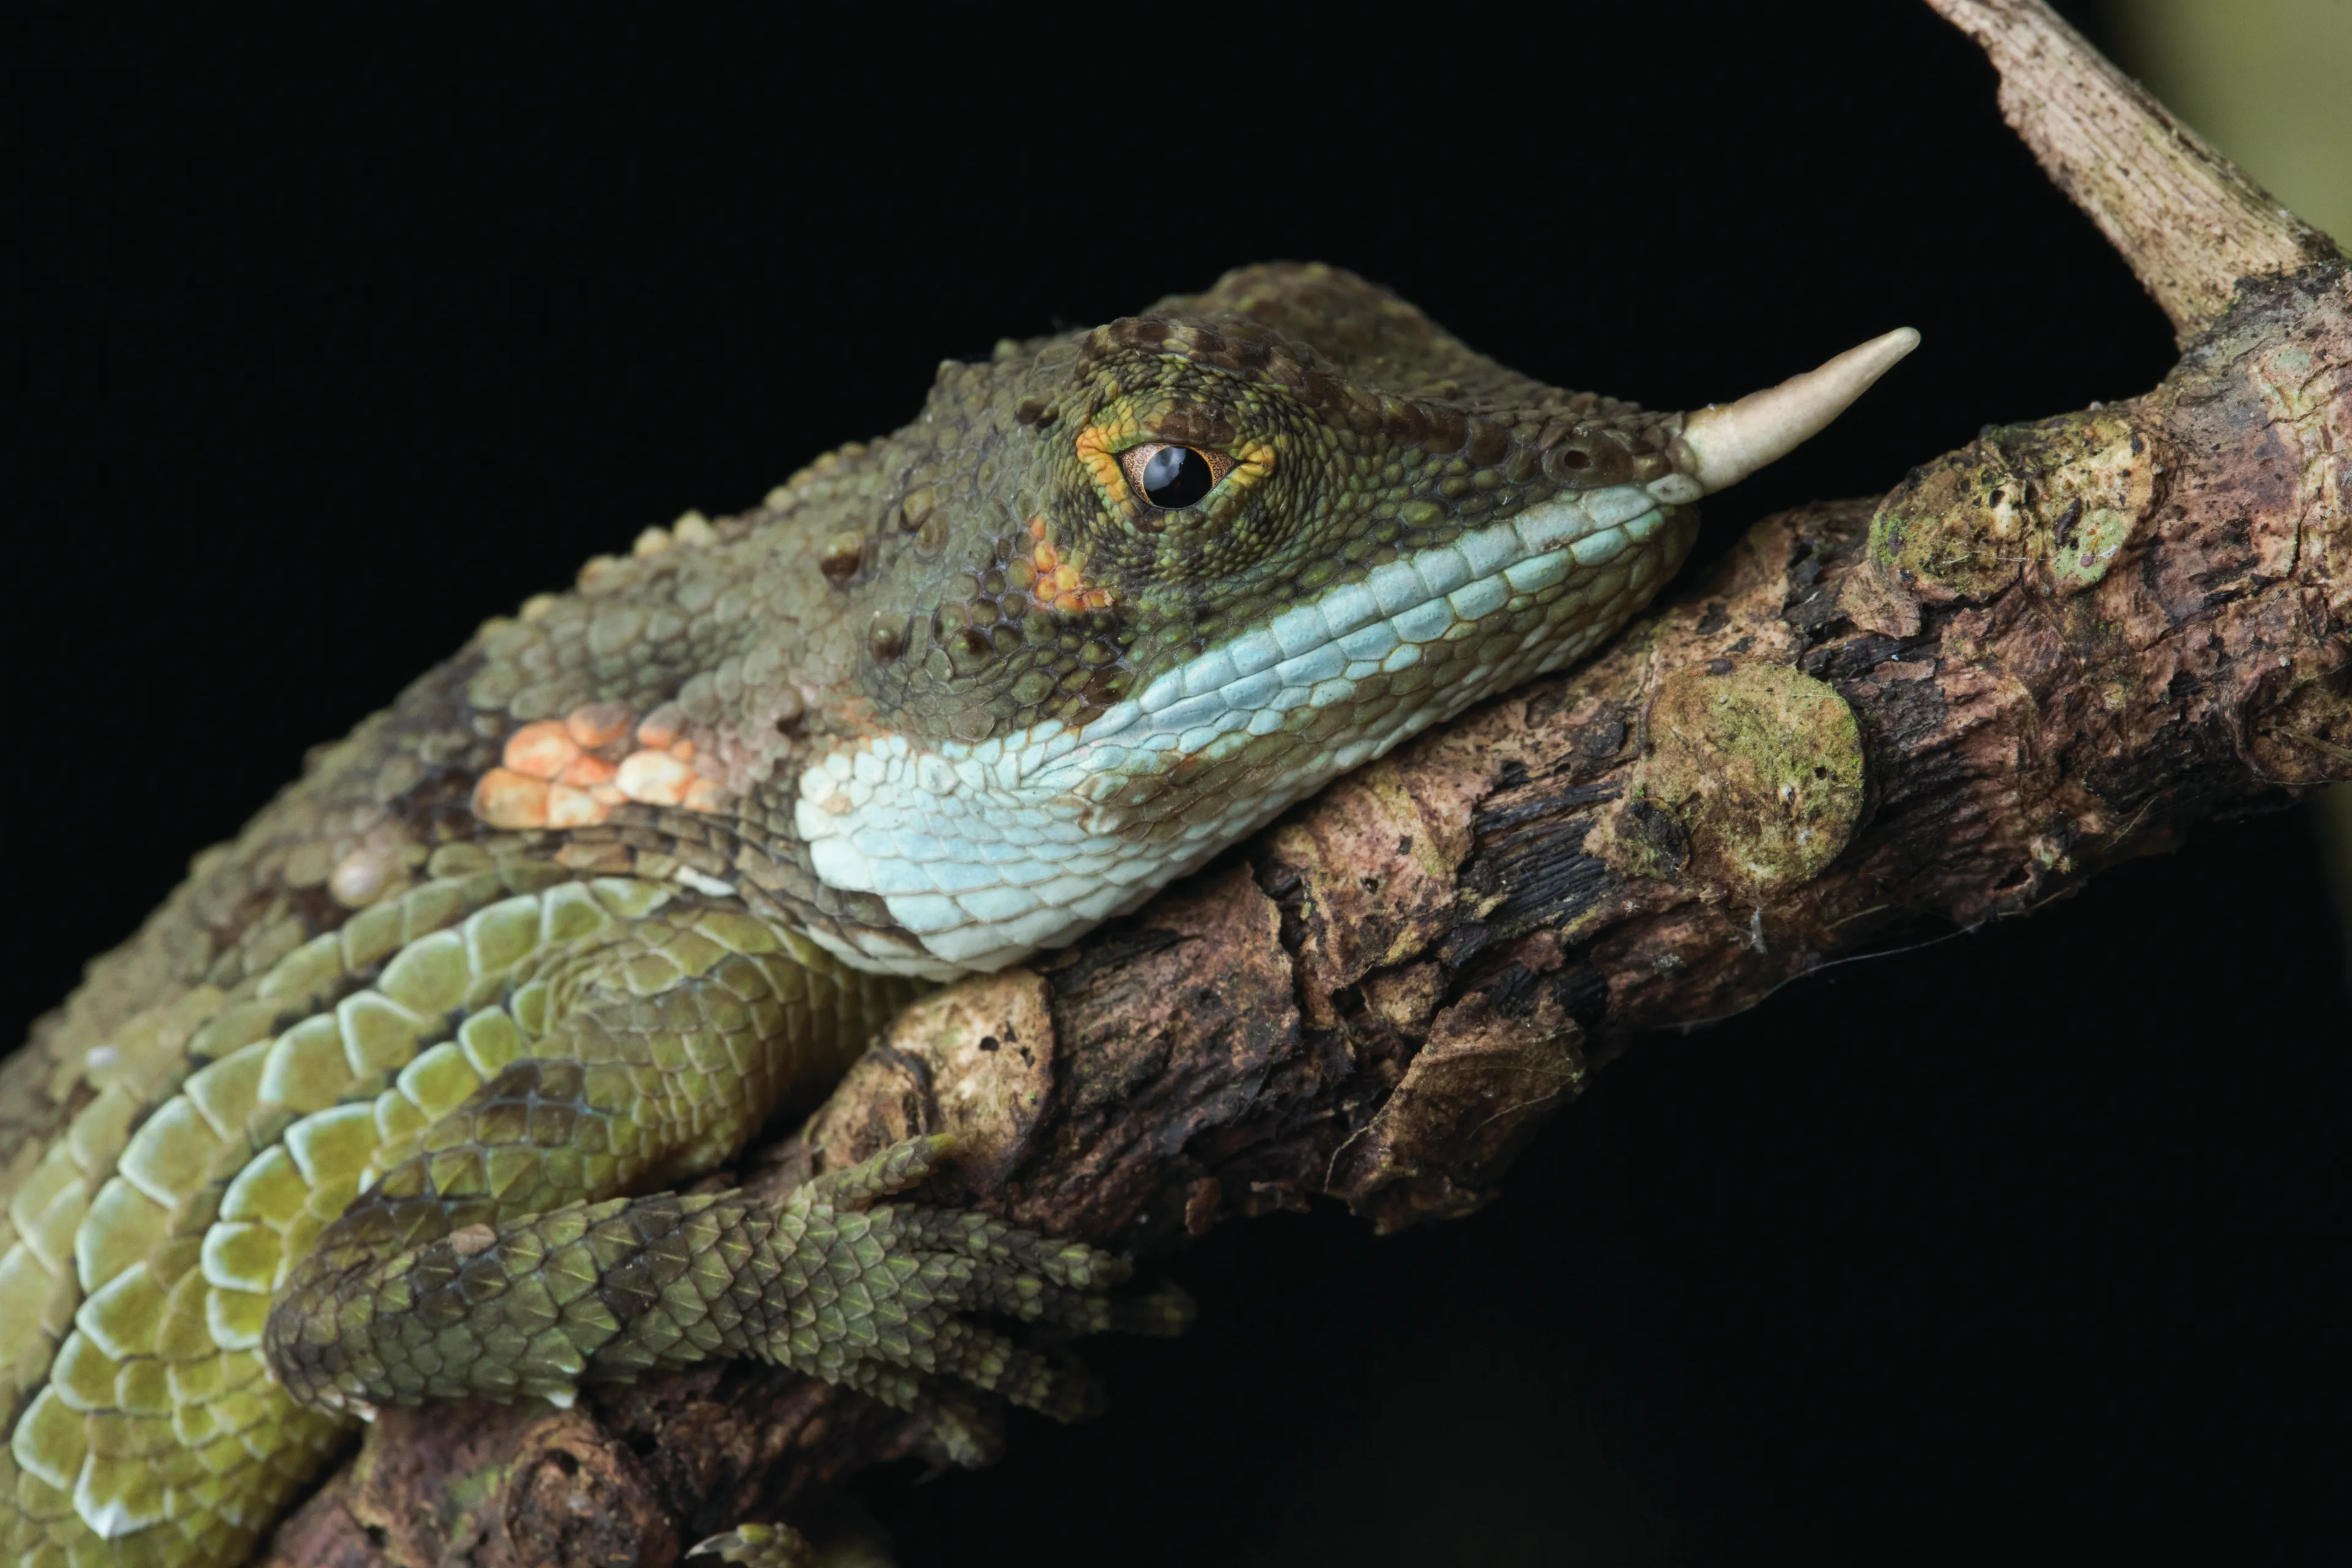 reptile-dilmah-conservation.jpg